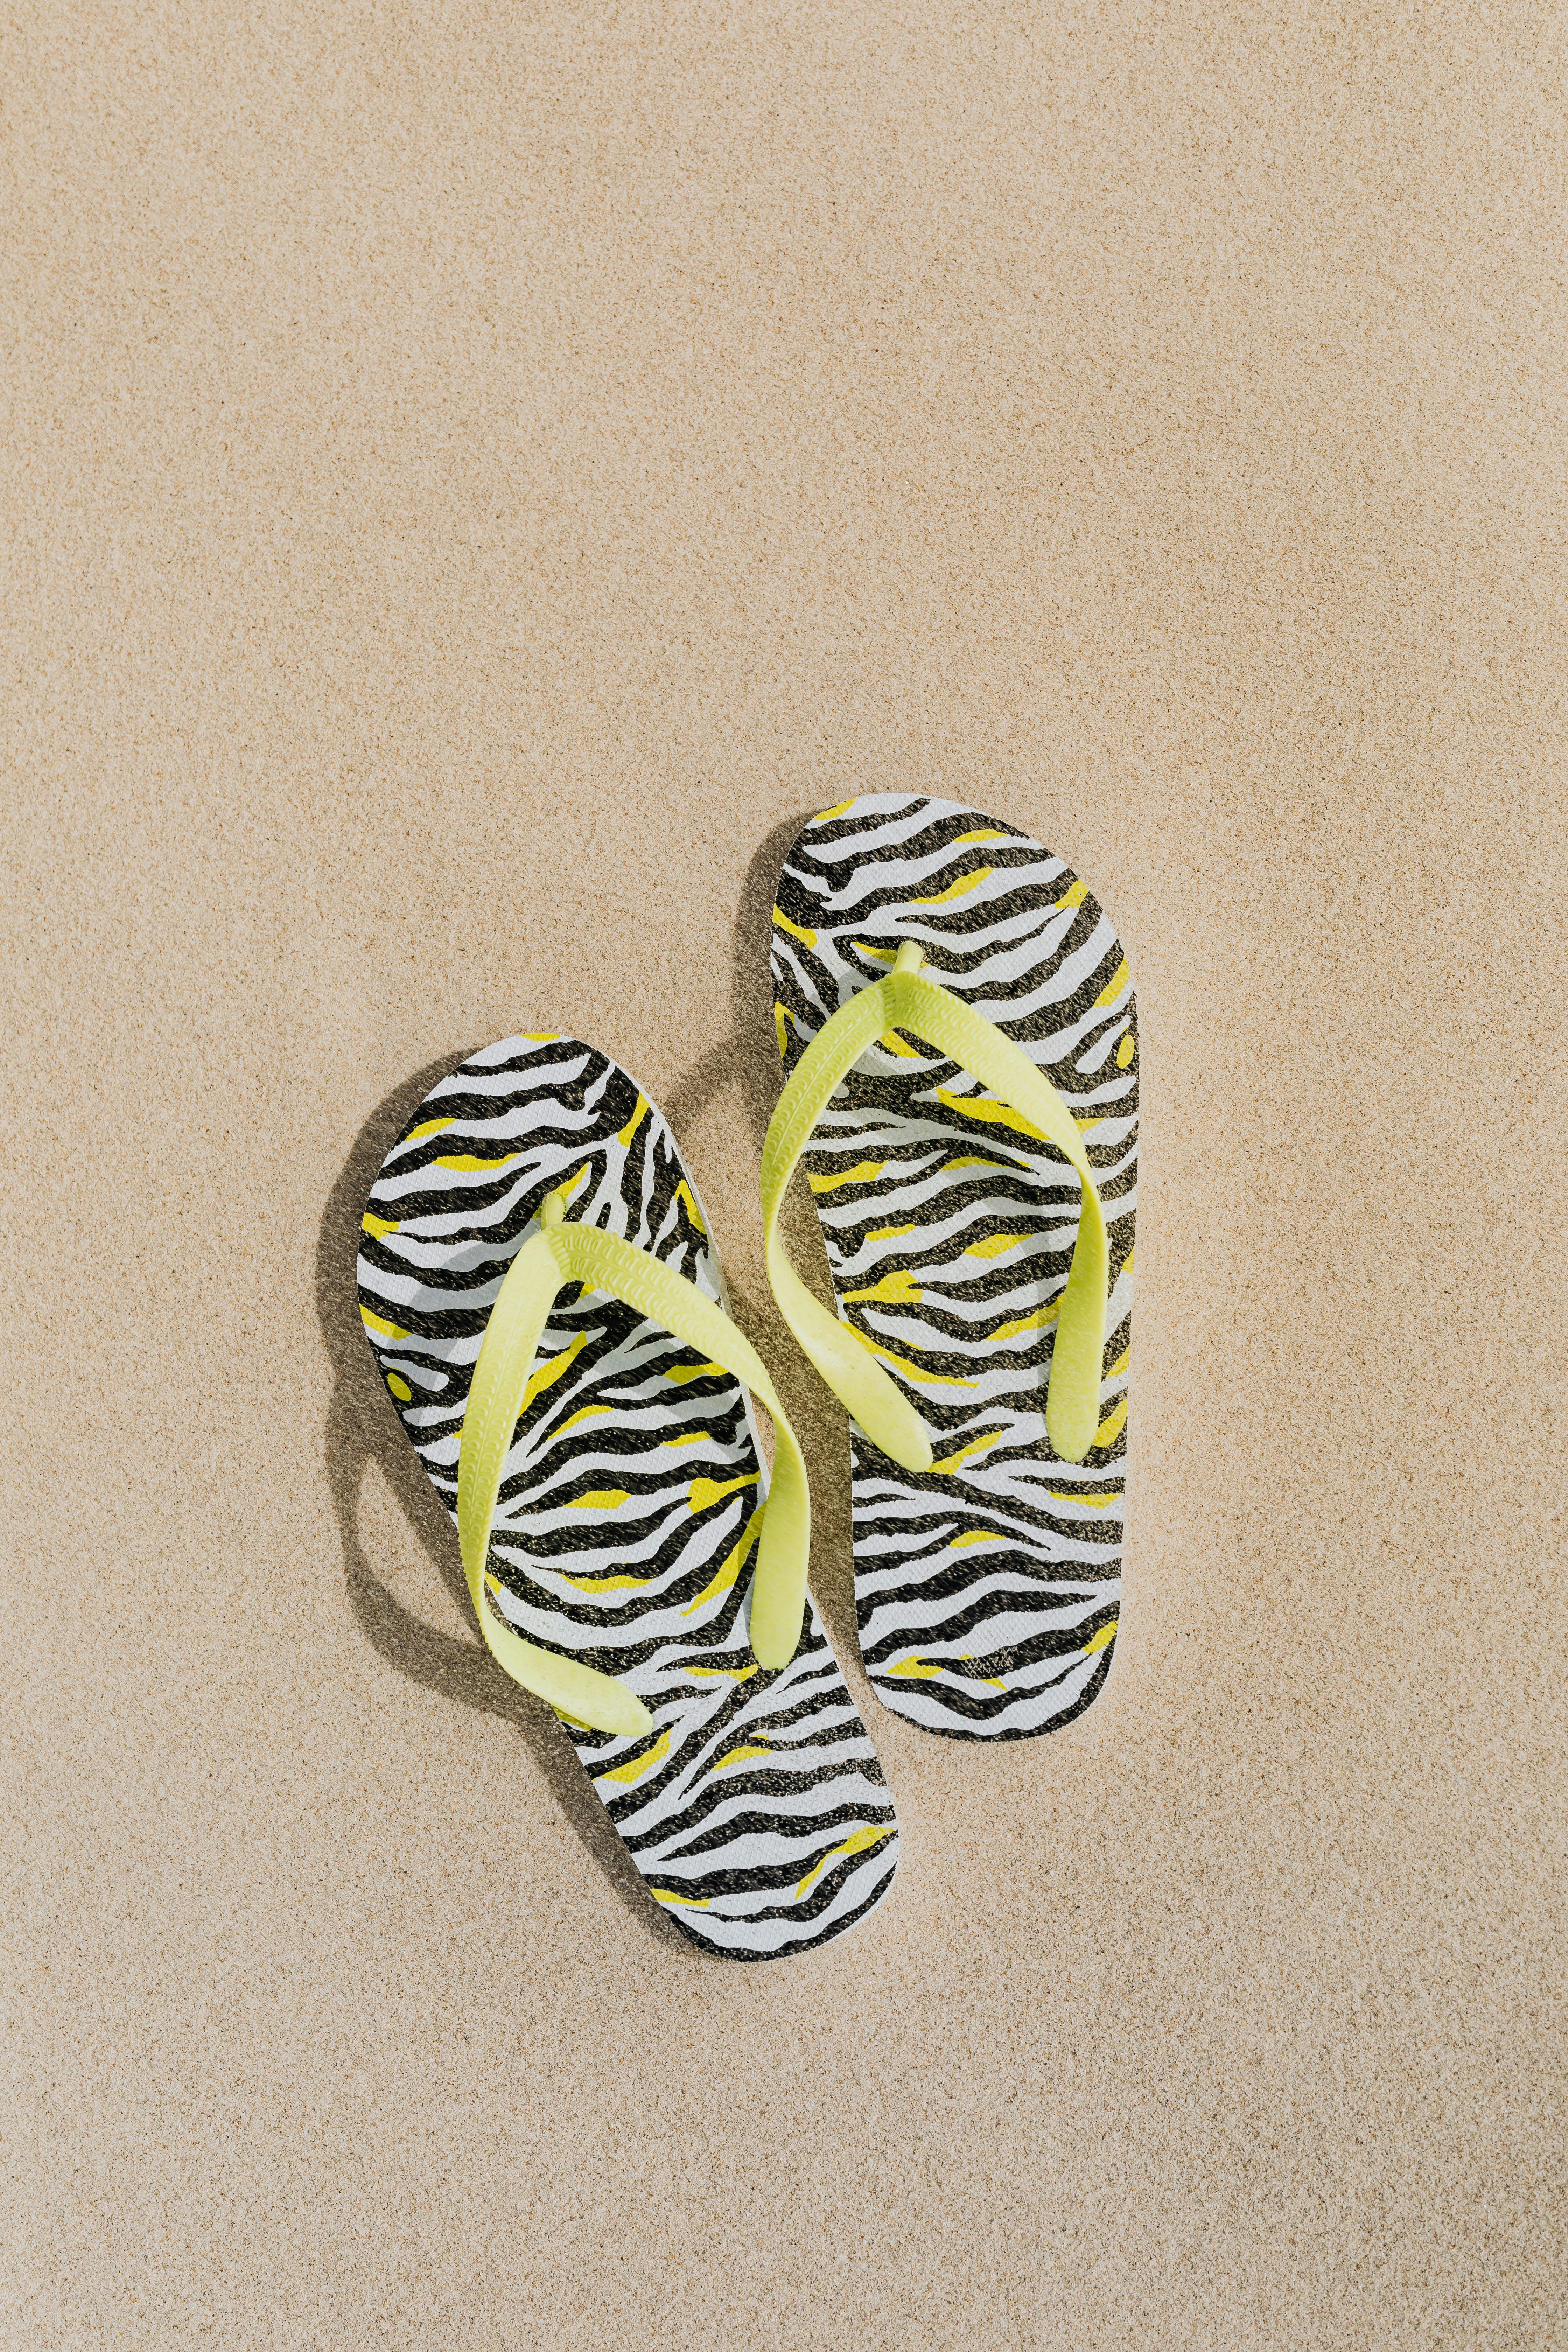 Flip Flops Slippers on a Mat · Free Stock Photo